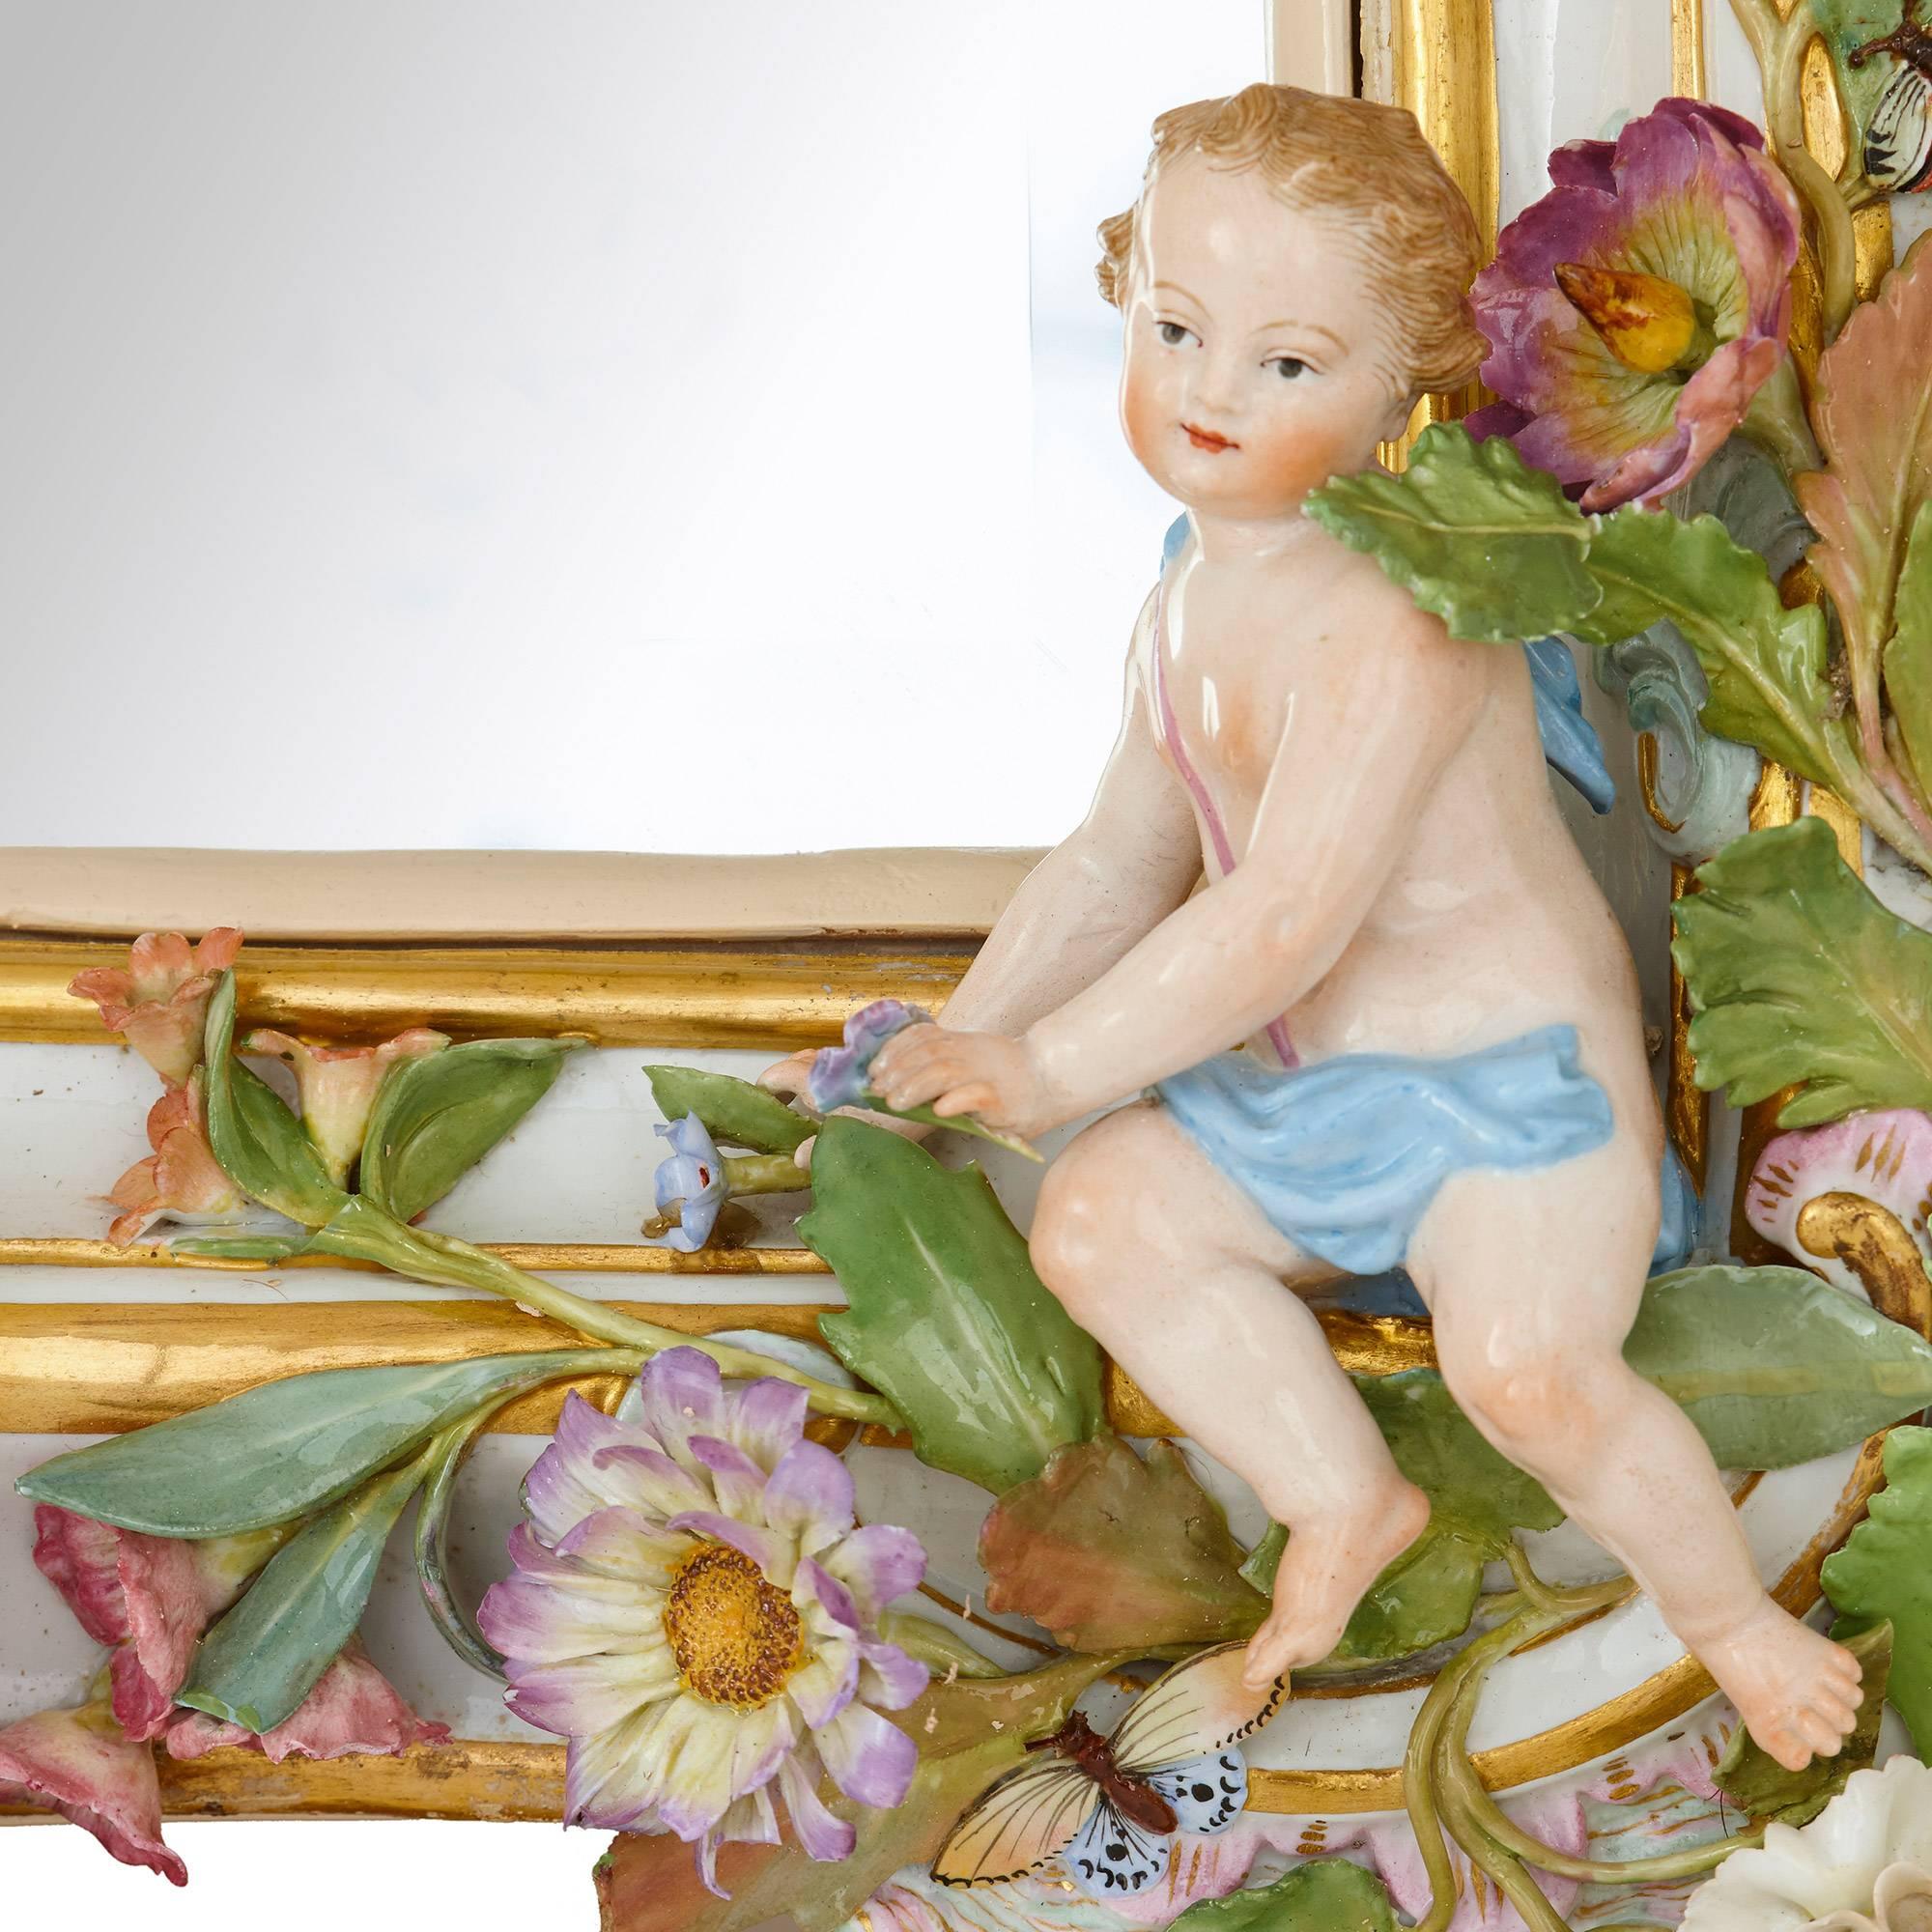 This awe-inspiring mirror features an exceptional frame crafted in Meissen porcelain and exceptionally decorated with colorful flowers, birds, butterflies, insects, putti, leaves and foliage. Every tiny detail, down to the last petal, has been